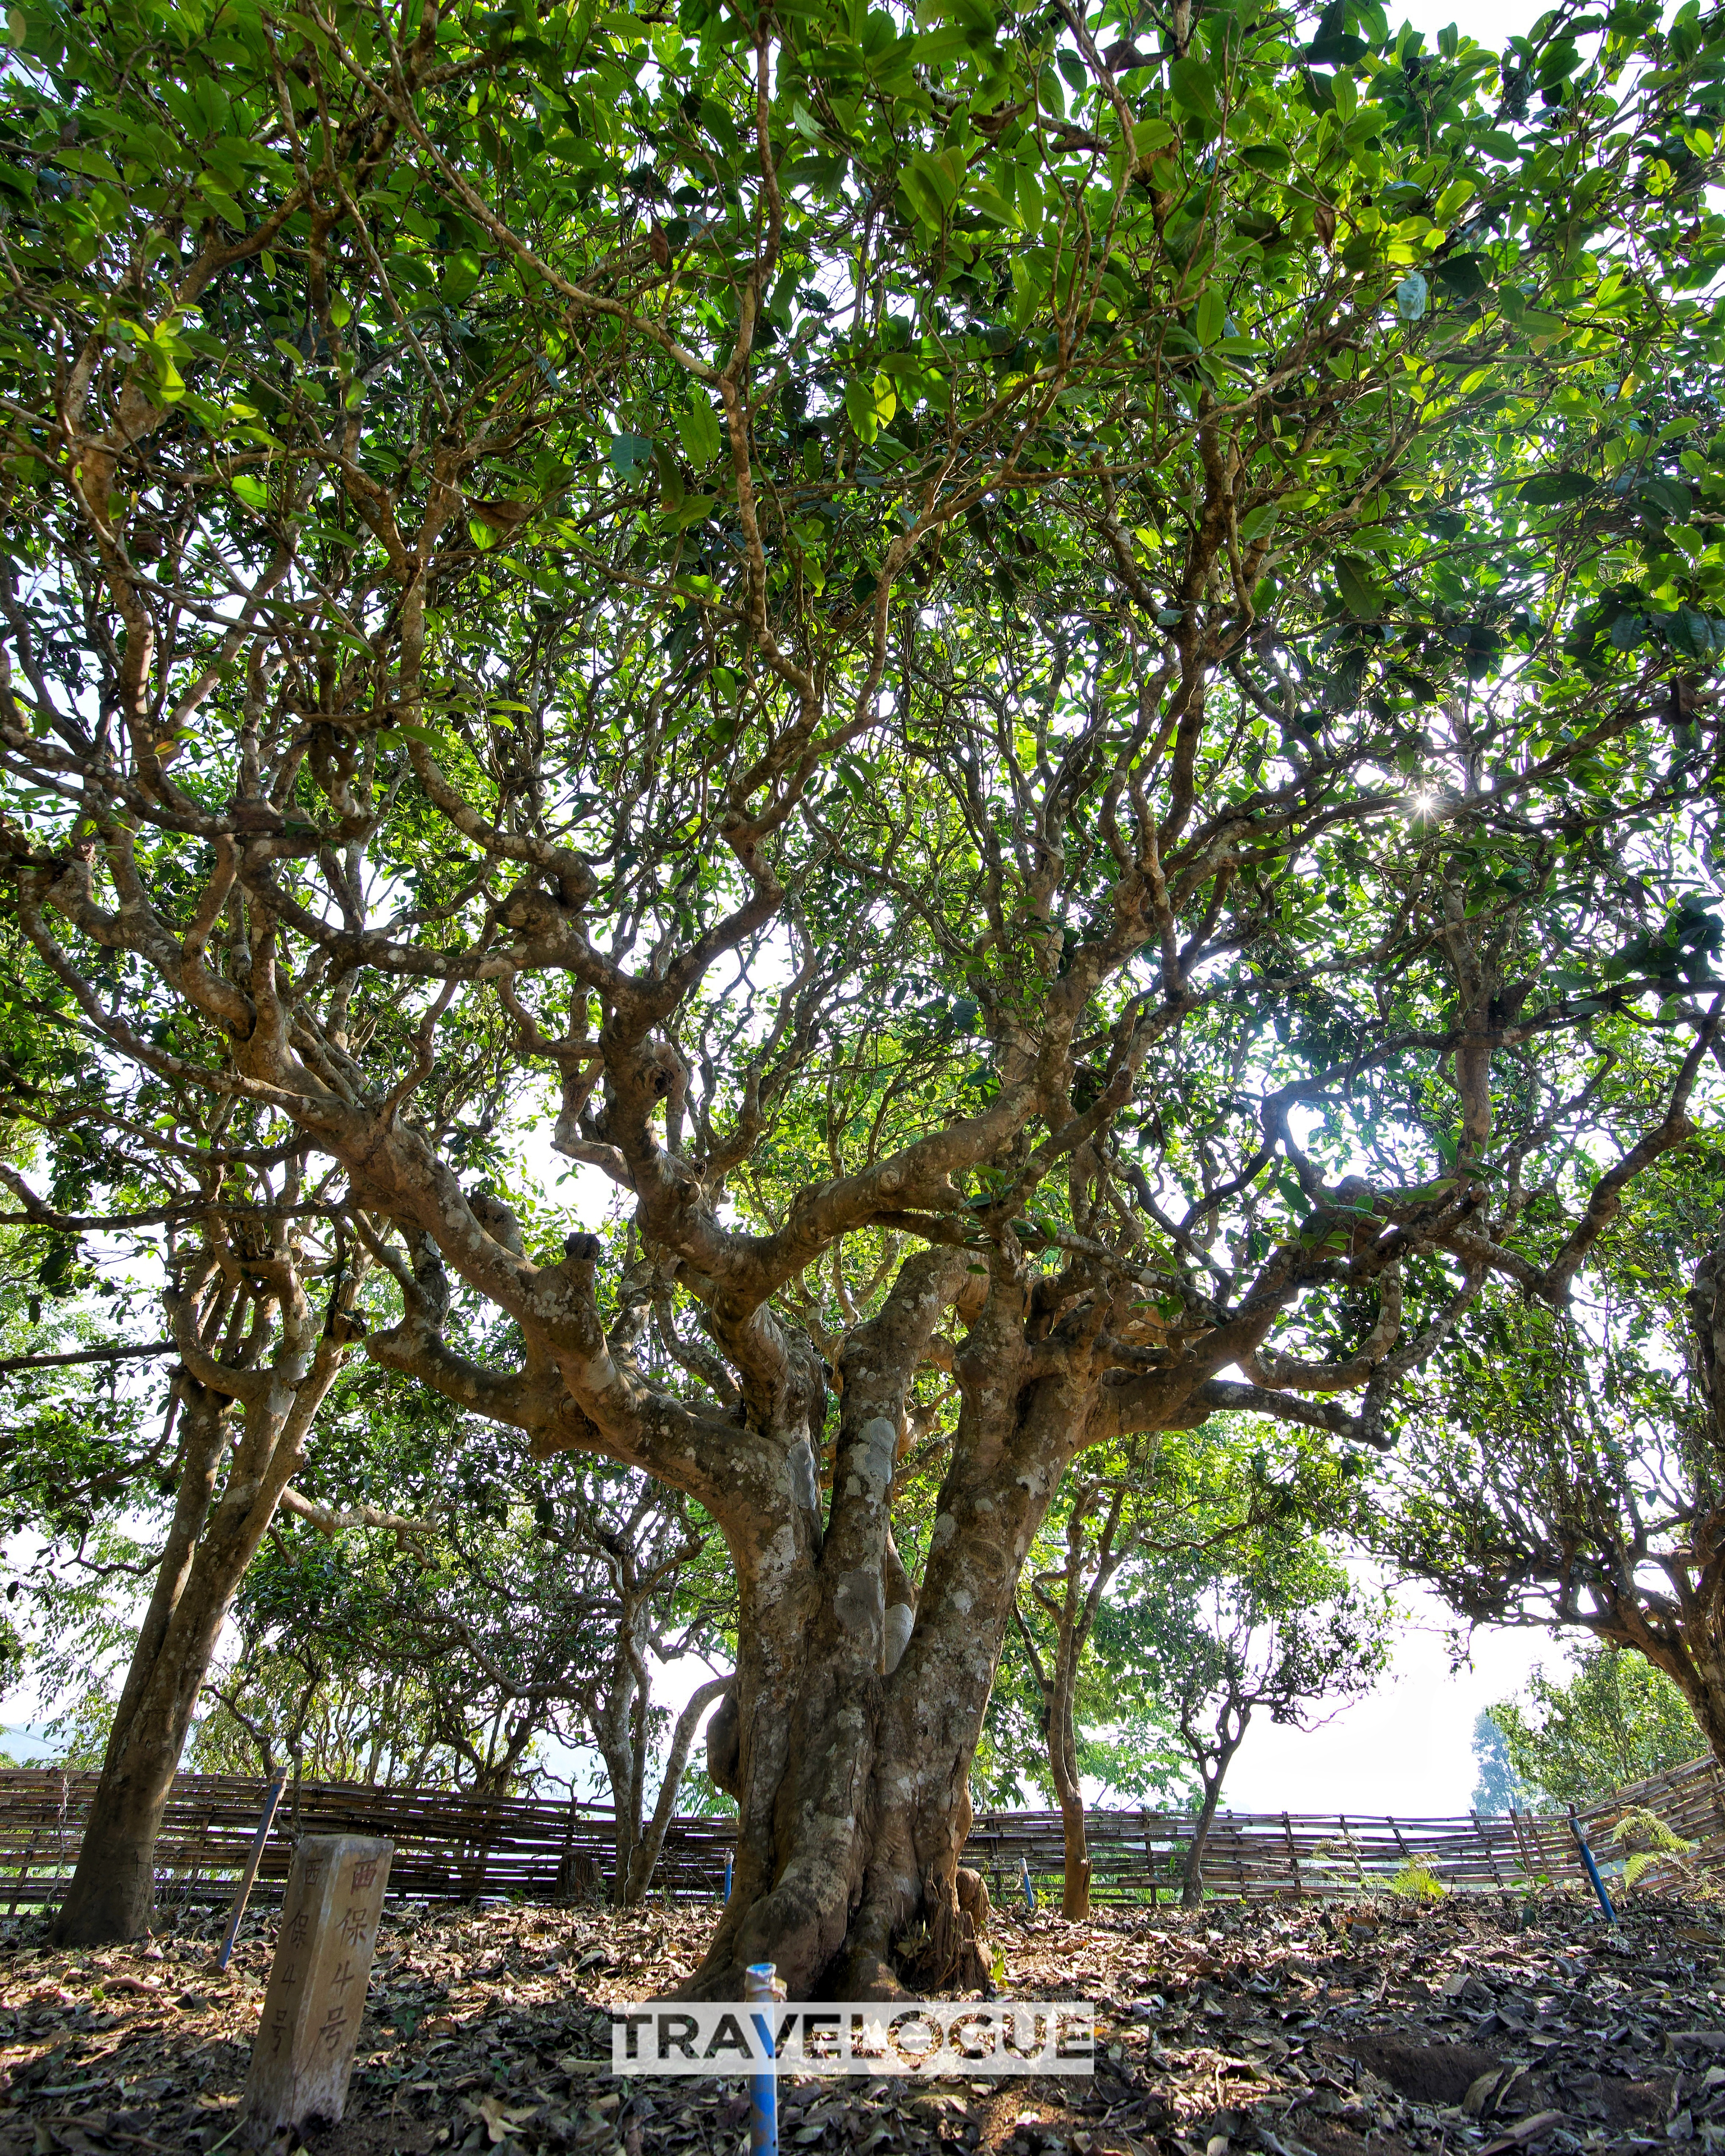 This undated photo shows the 1,400-year-old tea tree of the 